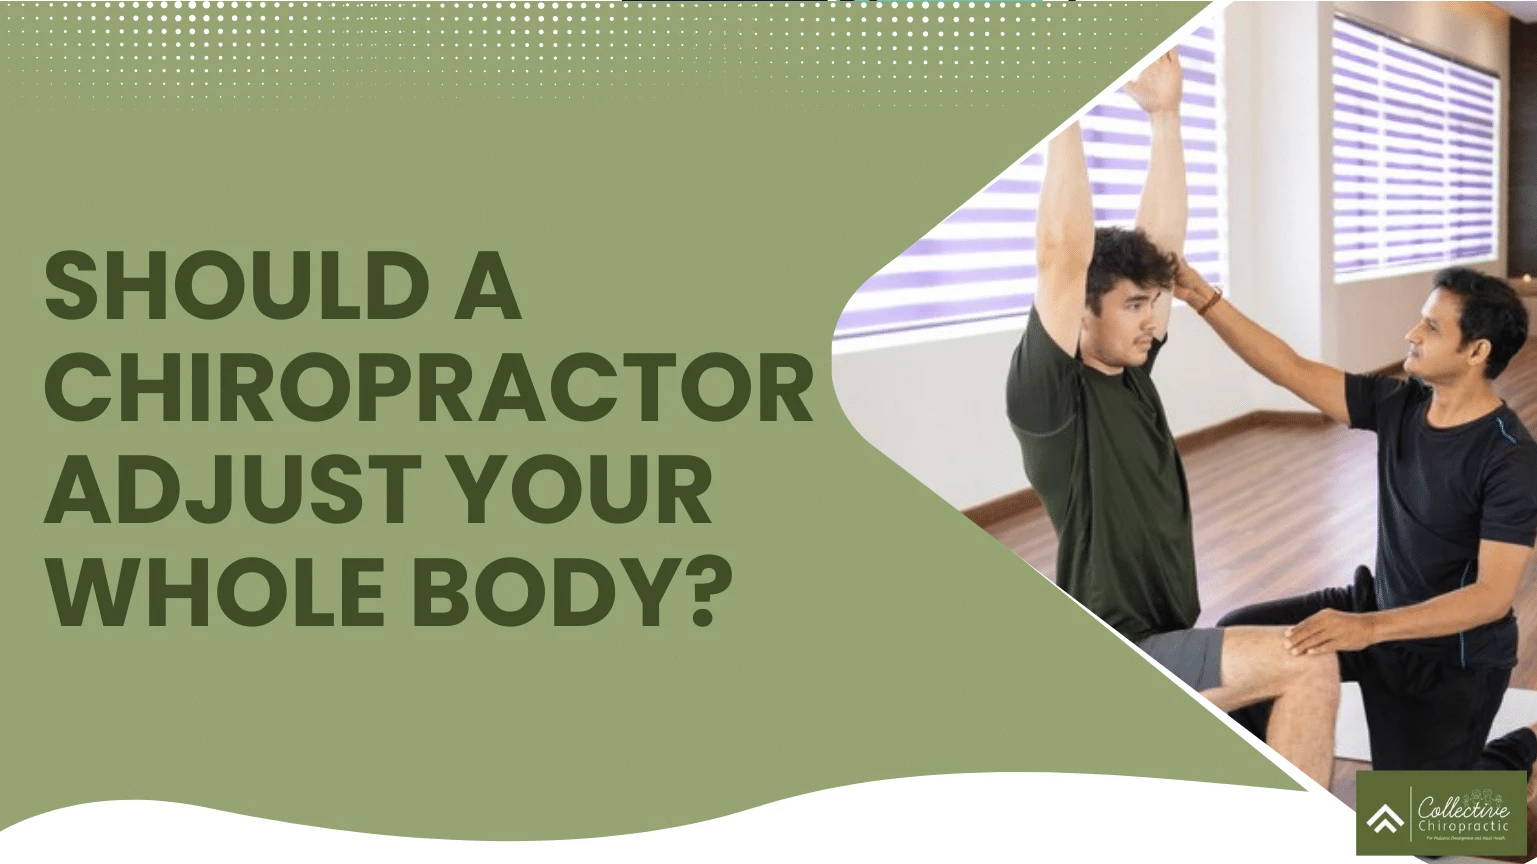 Should a Chiropractor Adjust Your Whole Body?